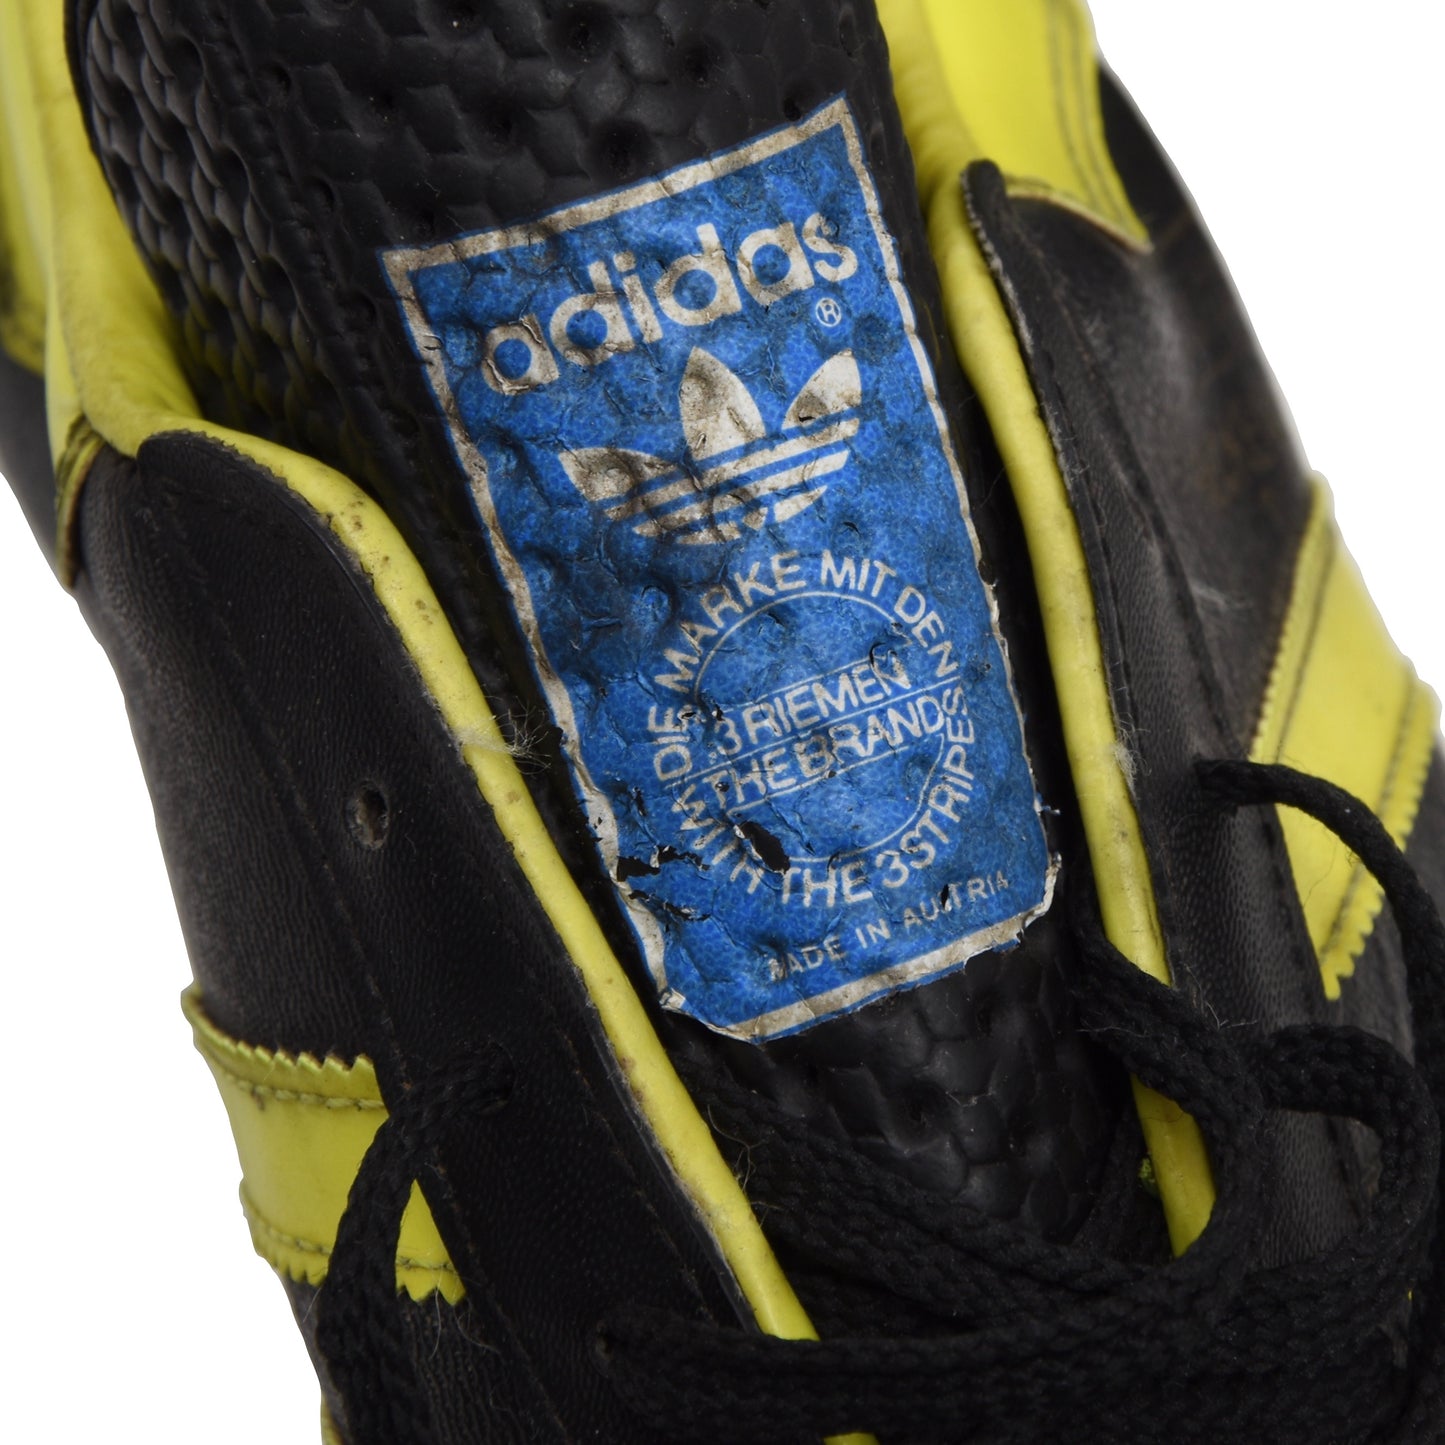 Vintage Adidas Beckenbauer Super Football Cleats Made in Austria Size 8 - Black/Neon Yellow